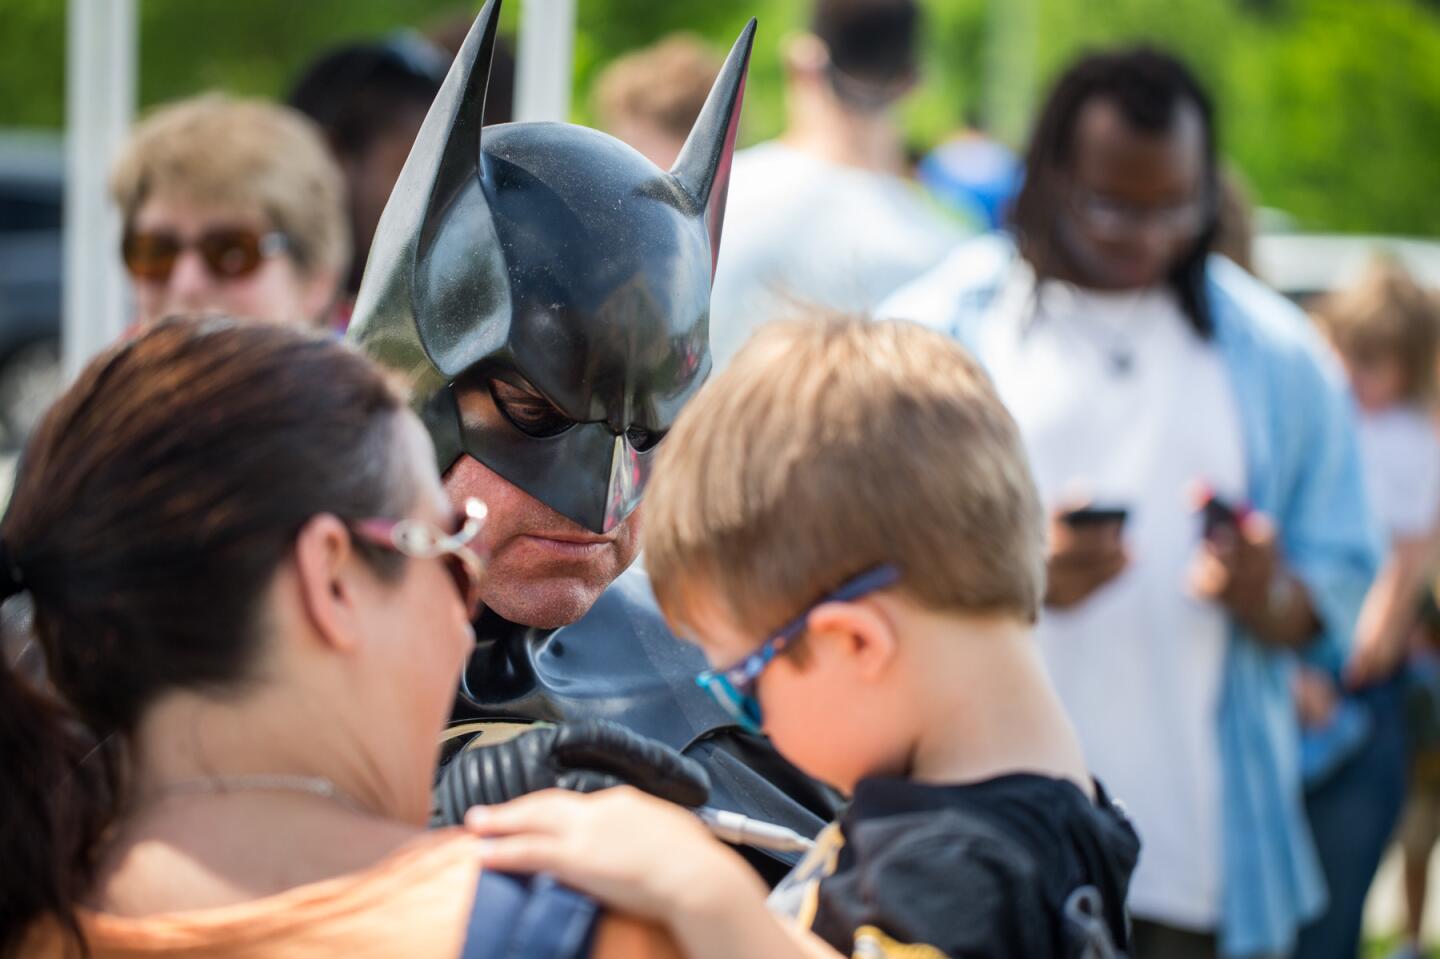 Leonard Robinson, as Batman, greets crowds of people after arriving at the Miller Branch Library in his Batmobile to kick off the Howard County Library System's summer reading program.